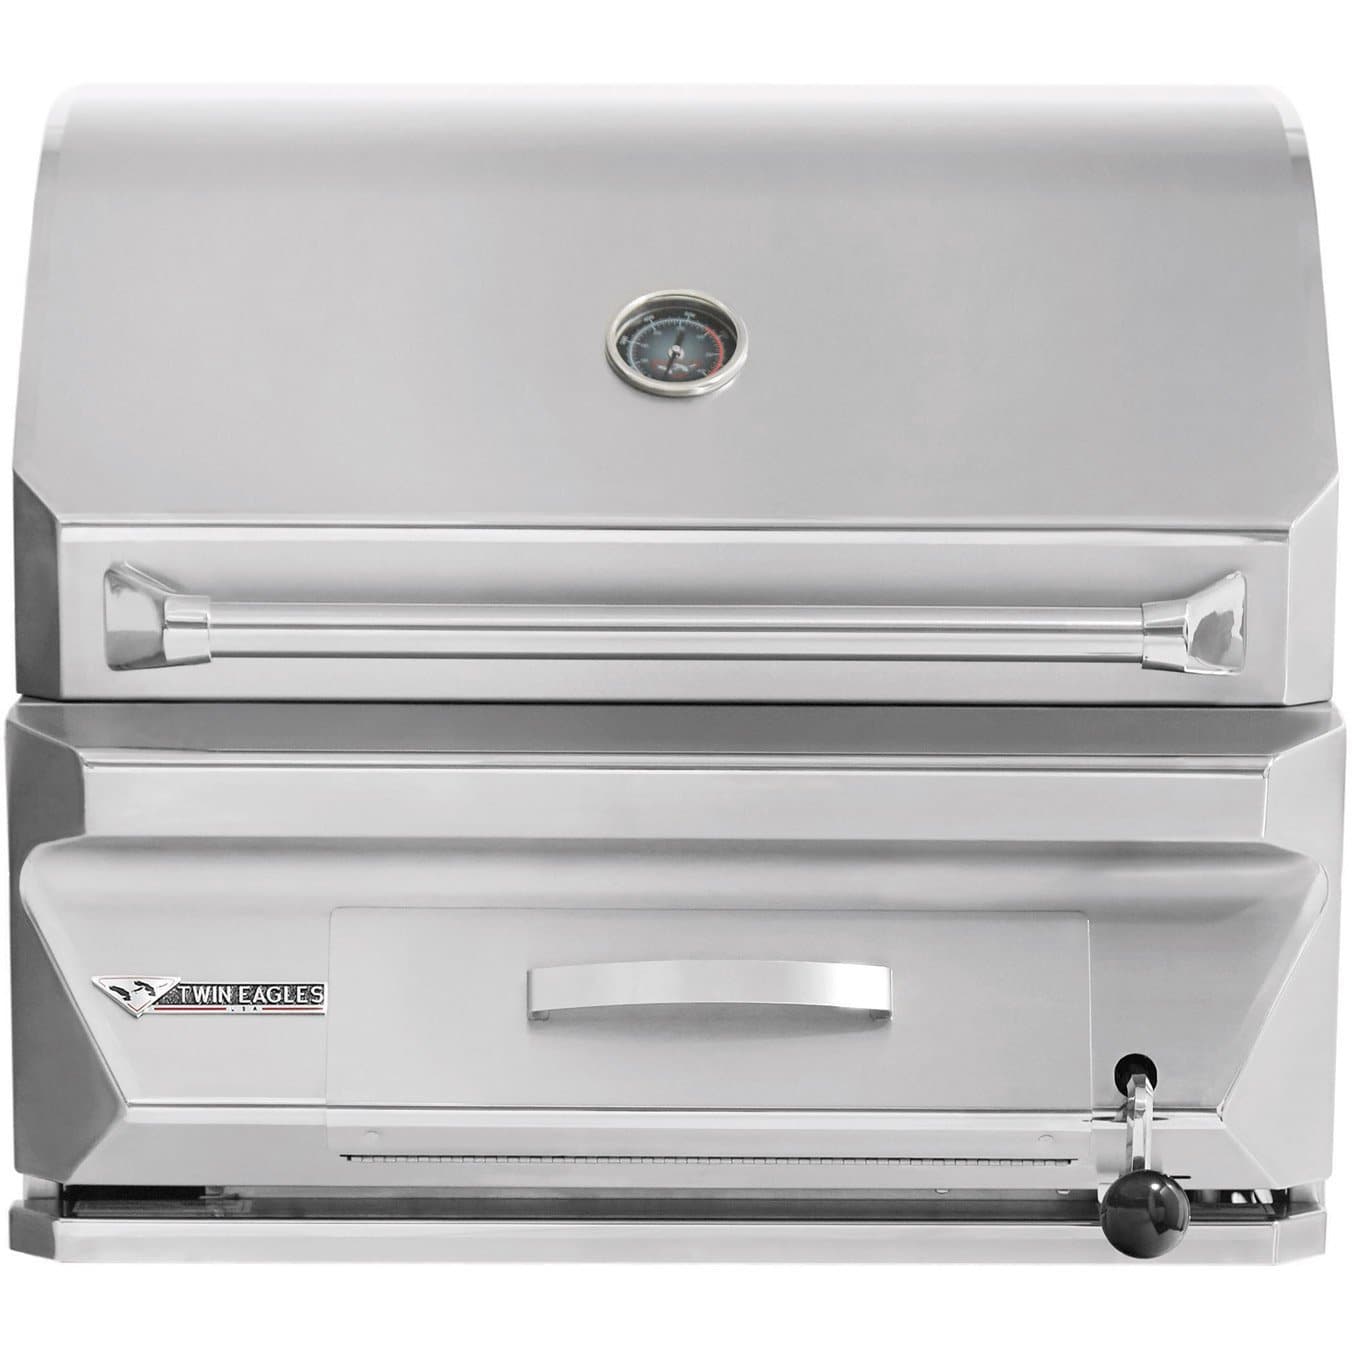 Twin Eagles 30" Charcoal Grill